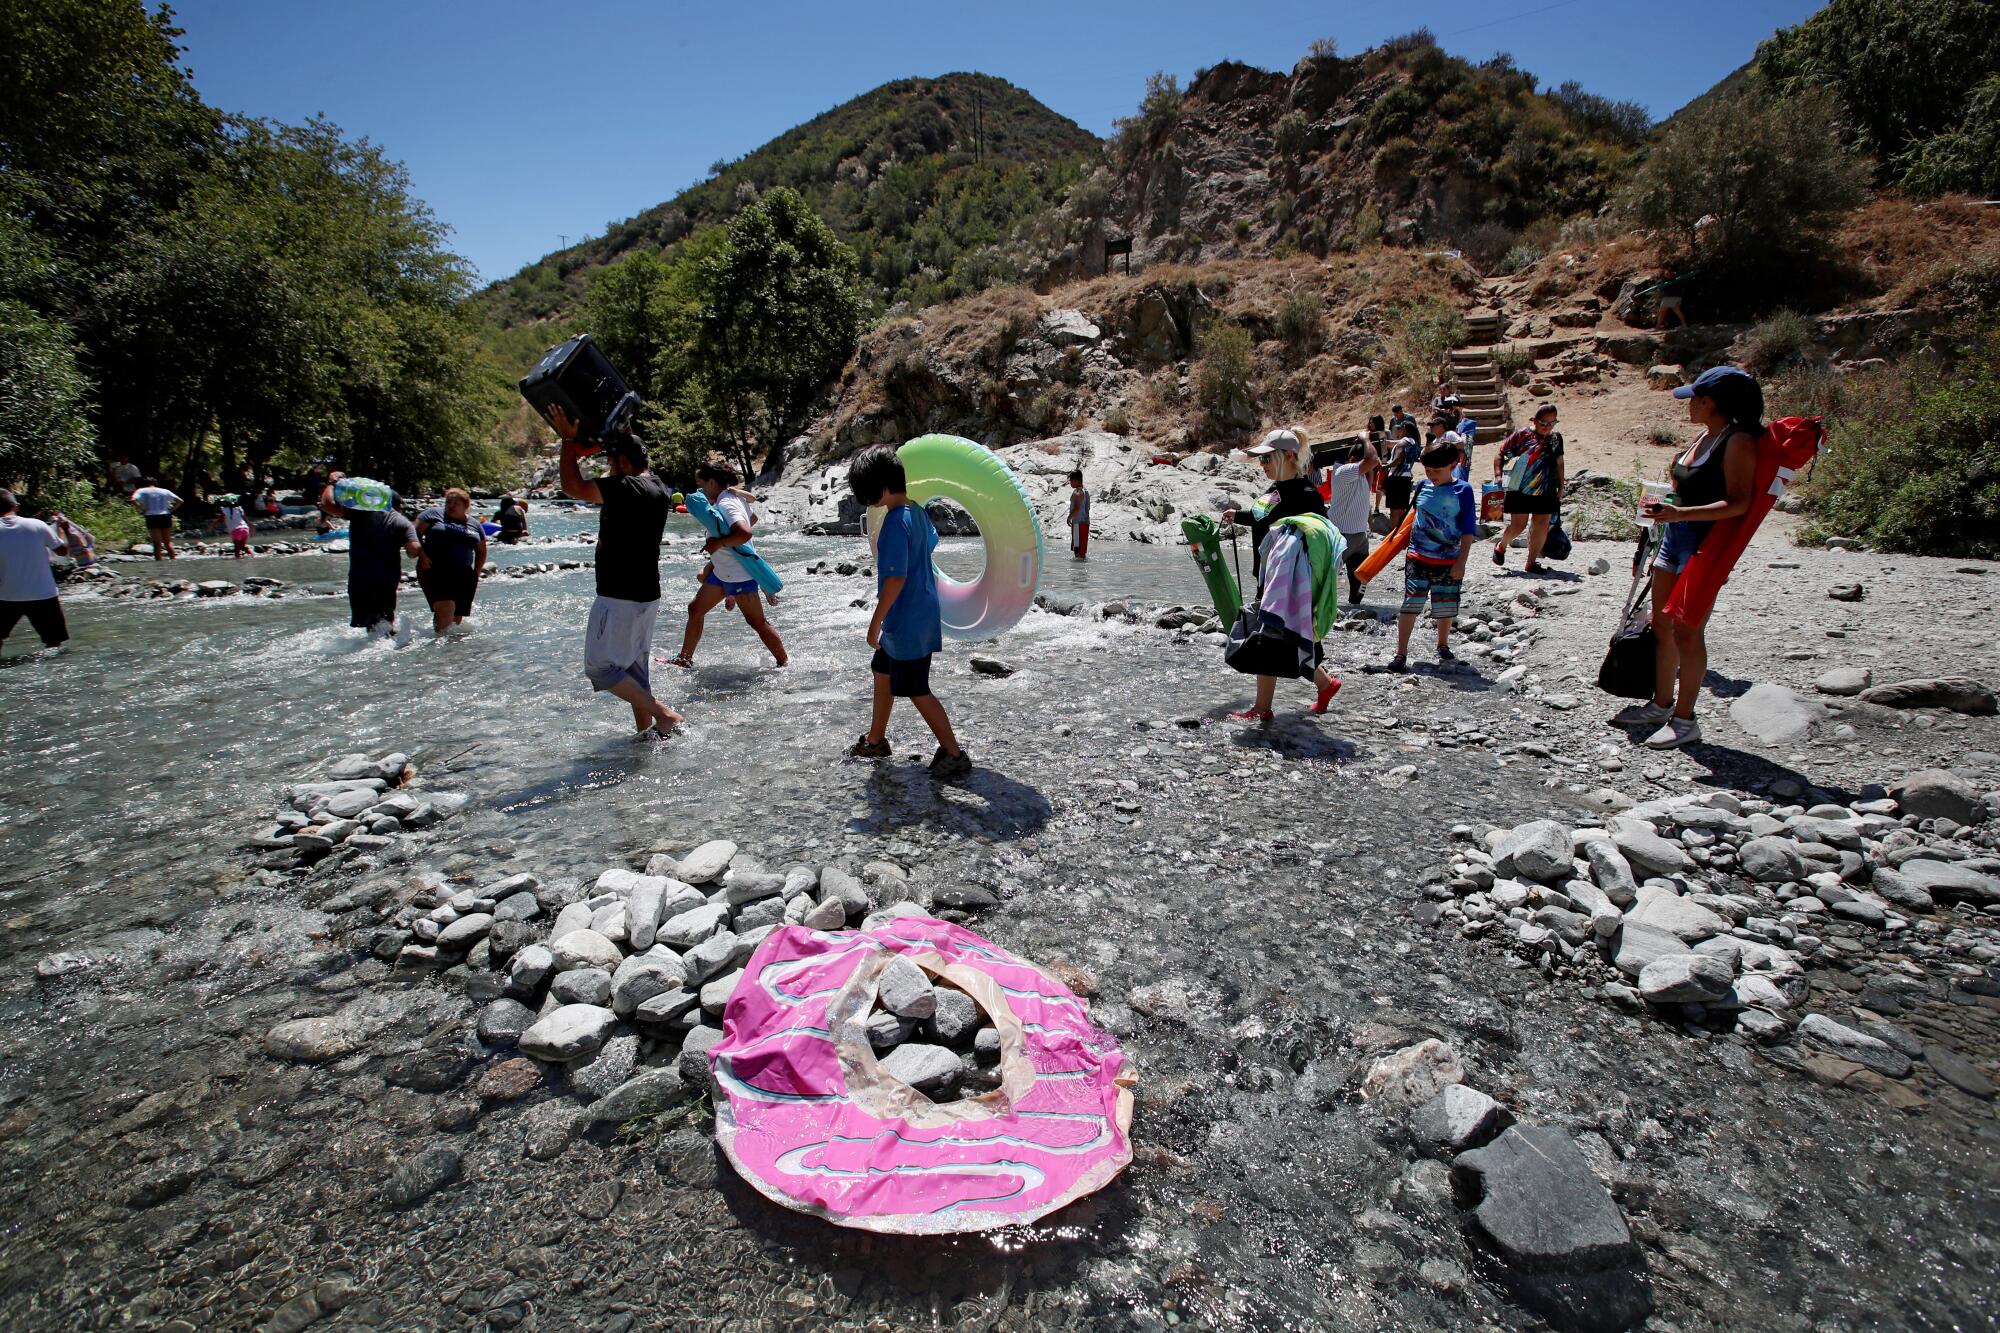 A deflated float toy lies on rocks as more than a dozen people wade into a shallow river.